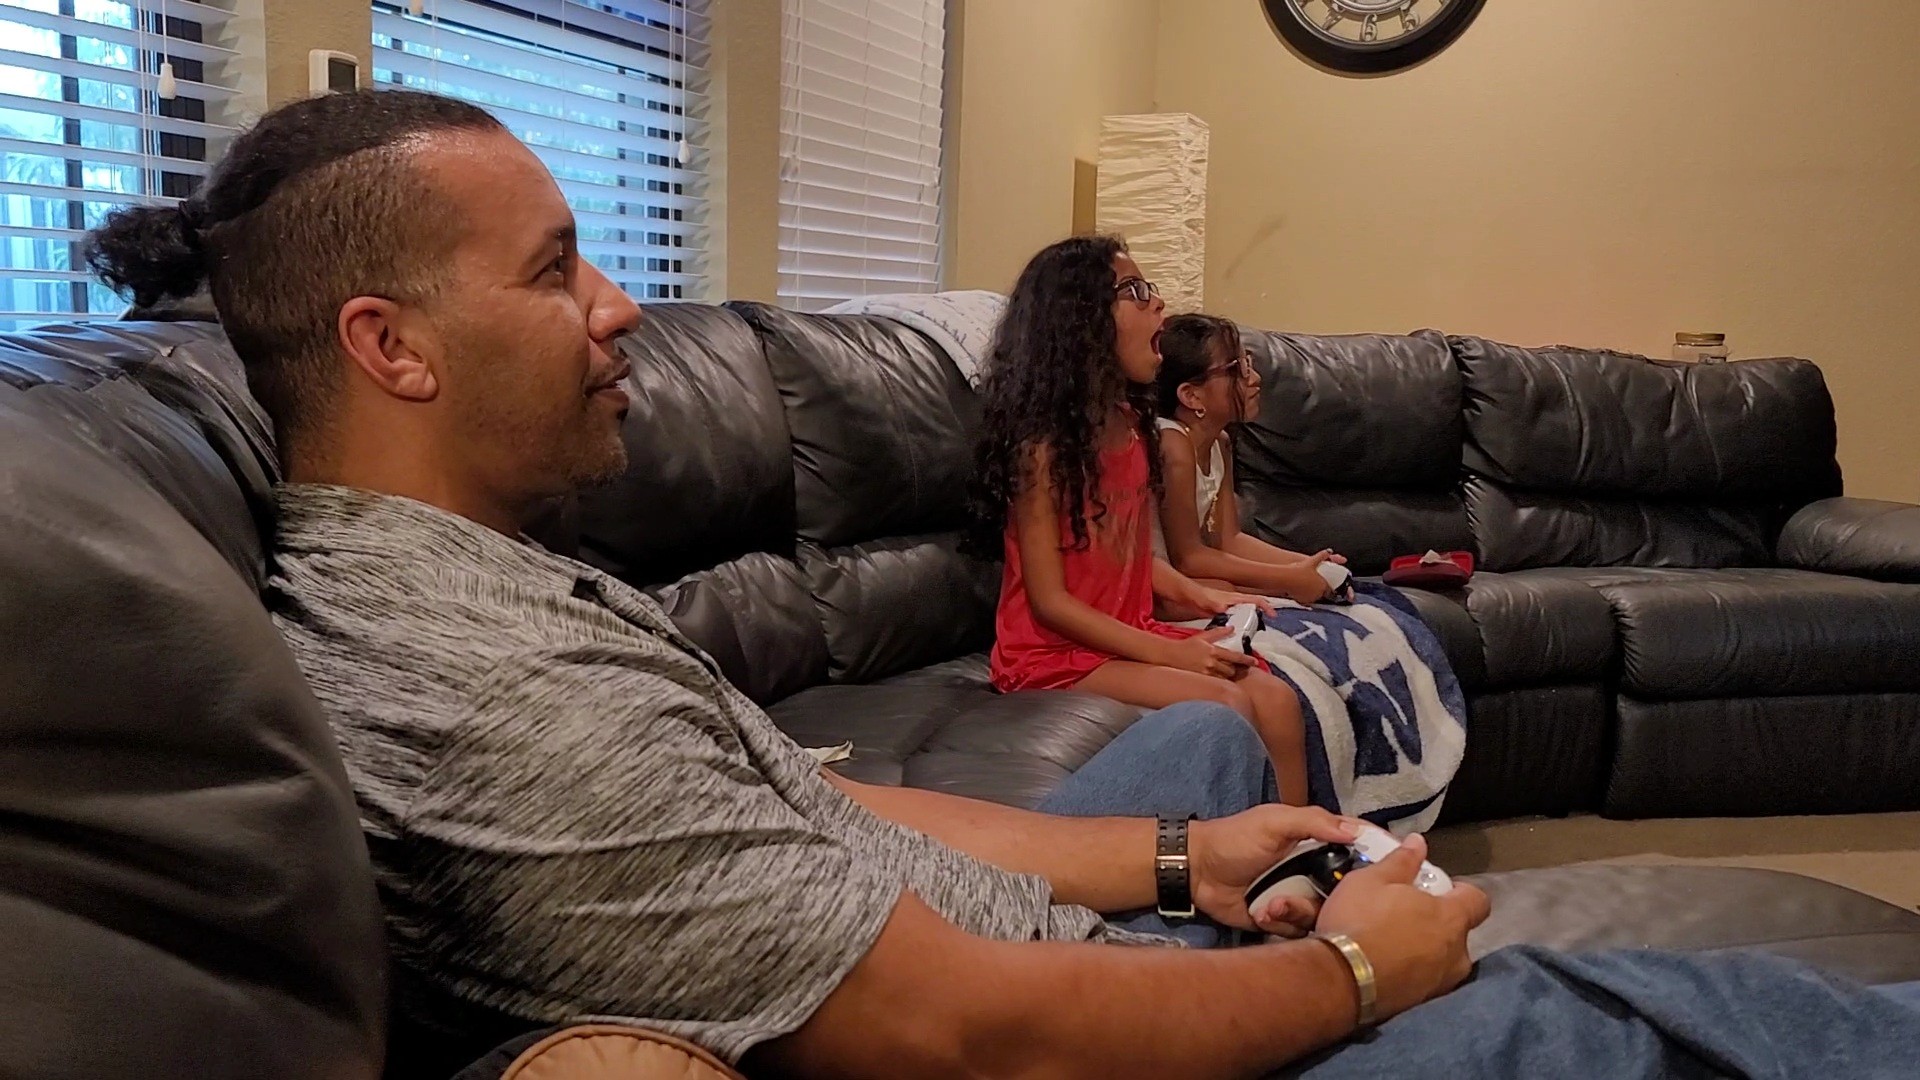 Mike Fisher plays video games with his daughters in this image from September 2021. (Spectrum News 1/Agustin Garfias)